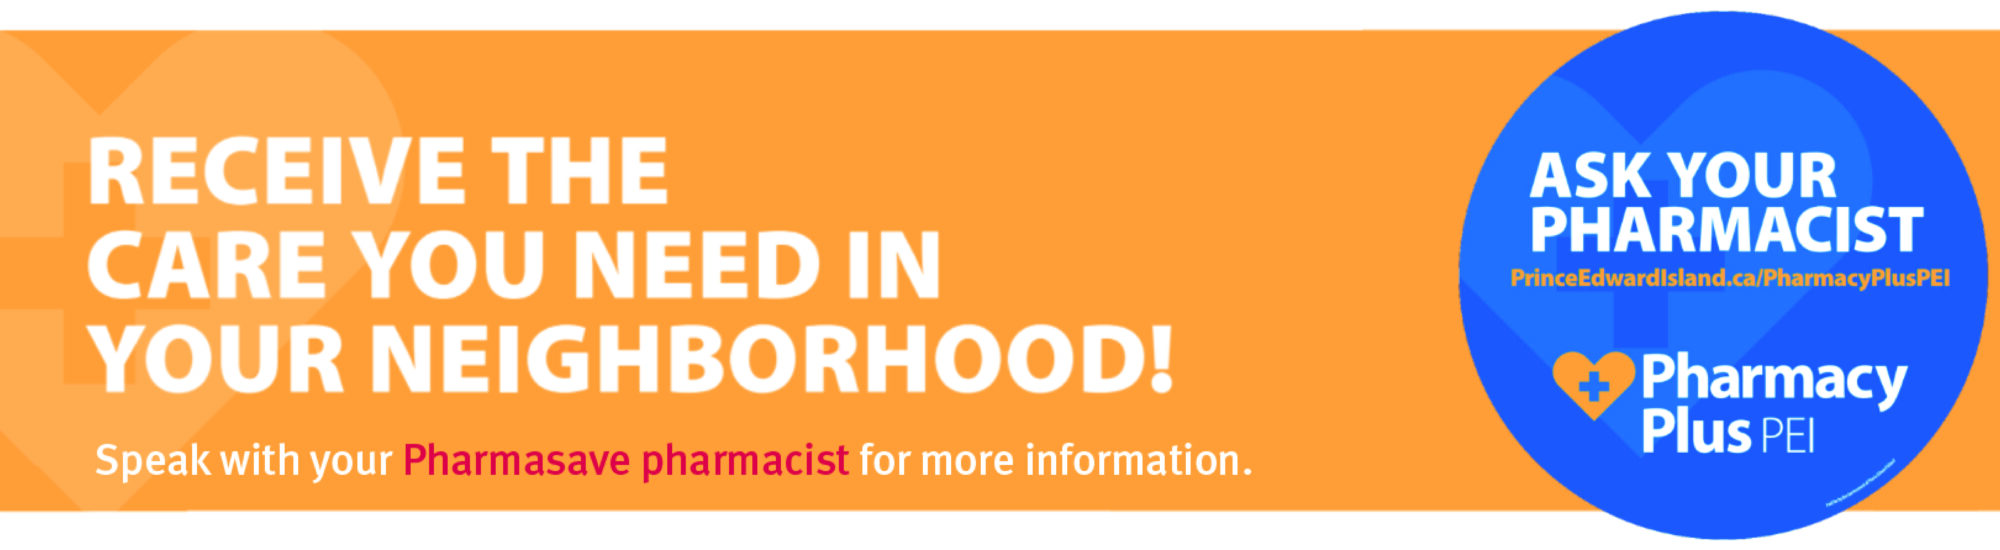 Receive the care you need in your neighbourhood. Speak with your Pharmasave Pharmacist for more information. Ask your Pharmacist. Princeedwardisland.ca/pharmacypluspei